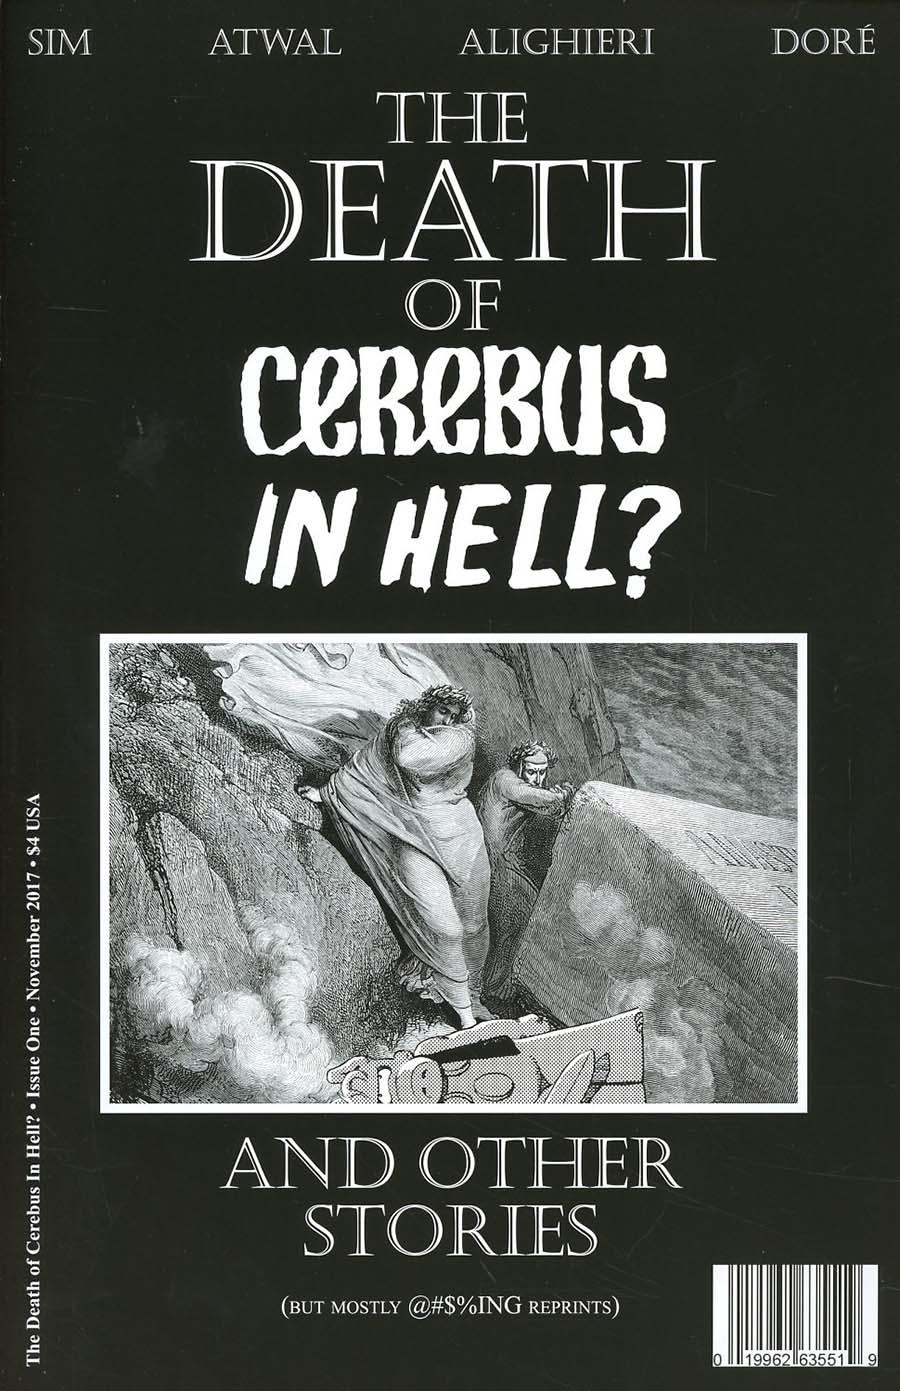 Death Of Cerebus In Hell Vol. 1 #1